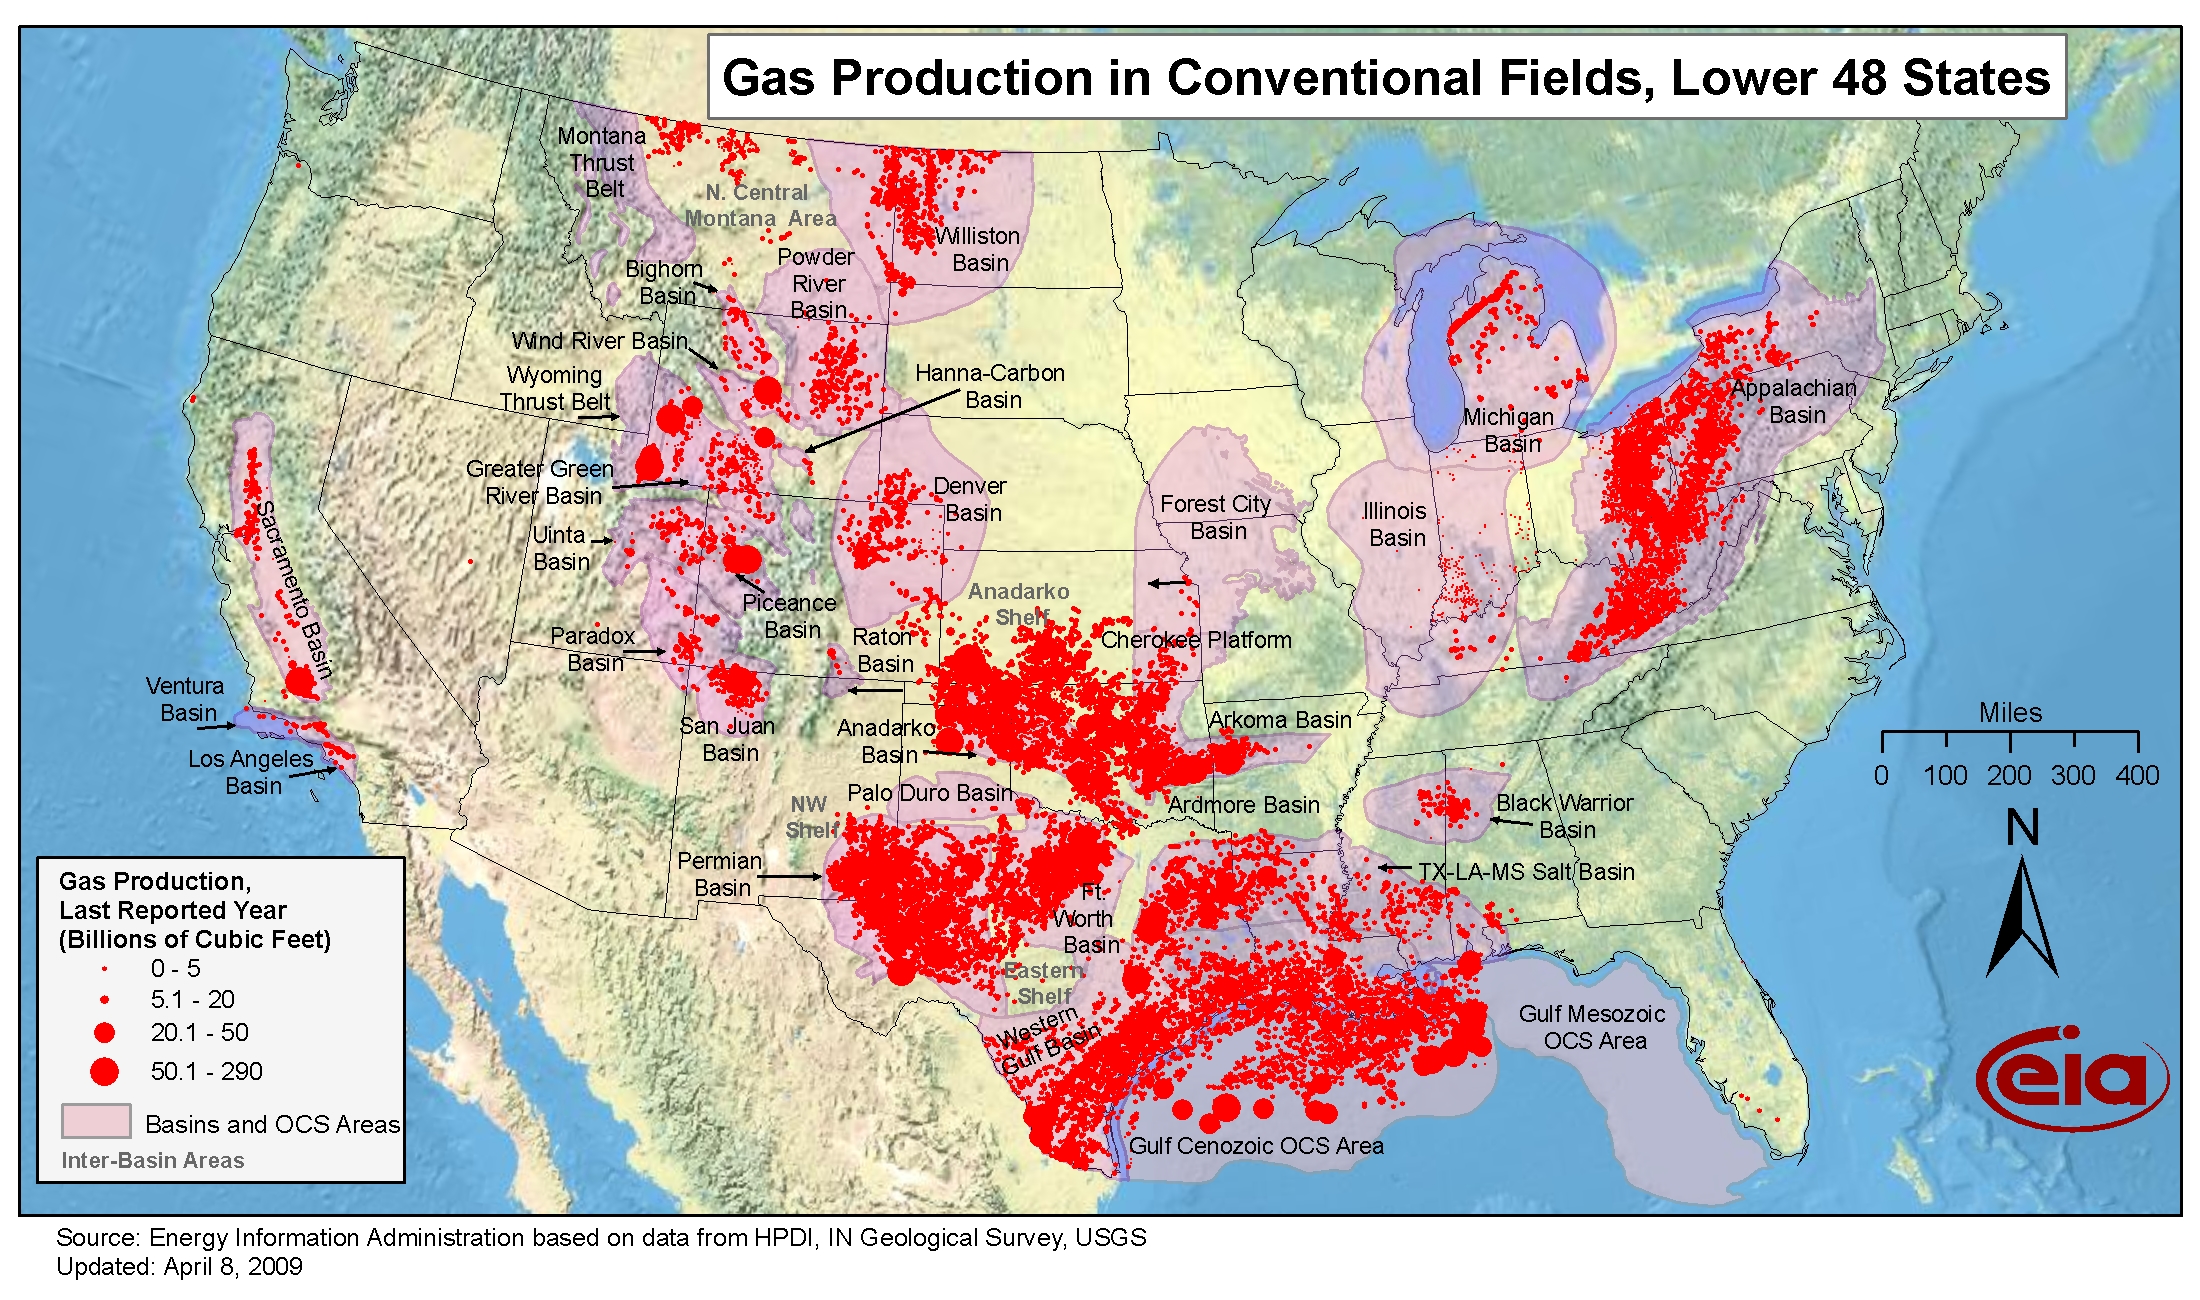 http://legacy.lib.utexas.edu/maps/united_states/us_gas_production_in_conventional_fields-2009.jpg